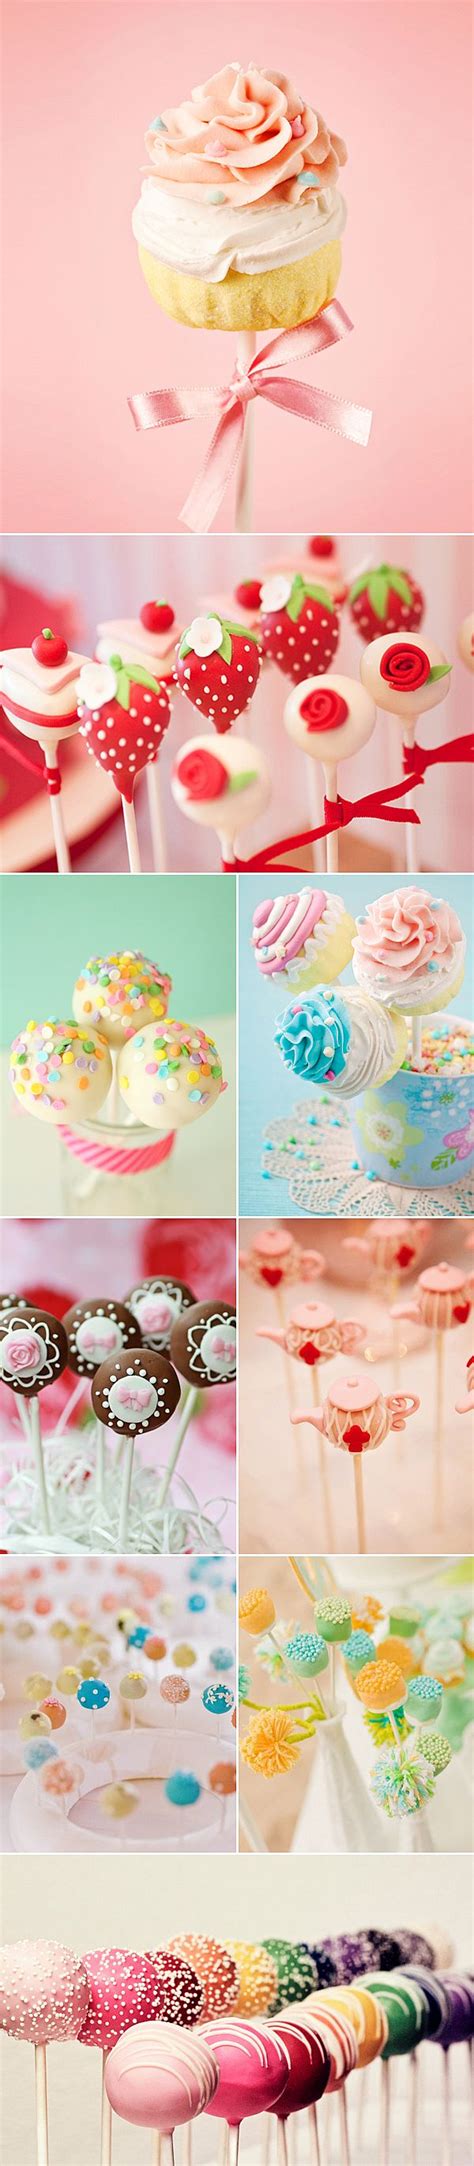 Easy Guide To Making Awesome Cake Pops Video 19 Mouth Watering Ideas